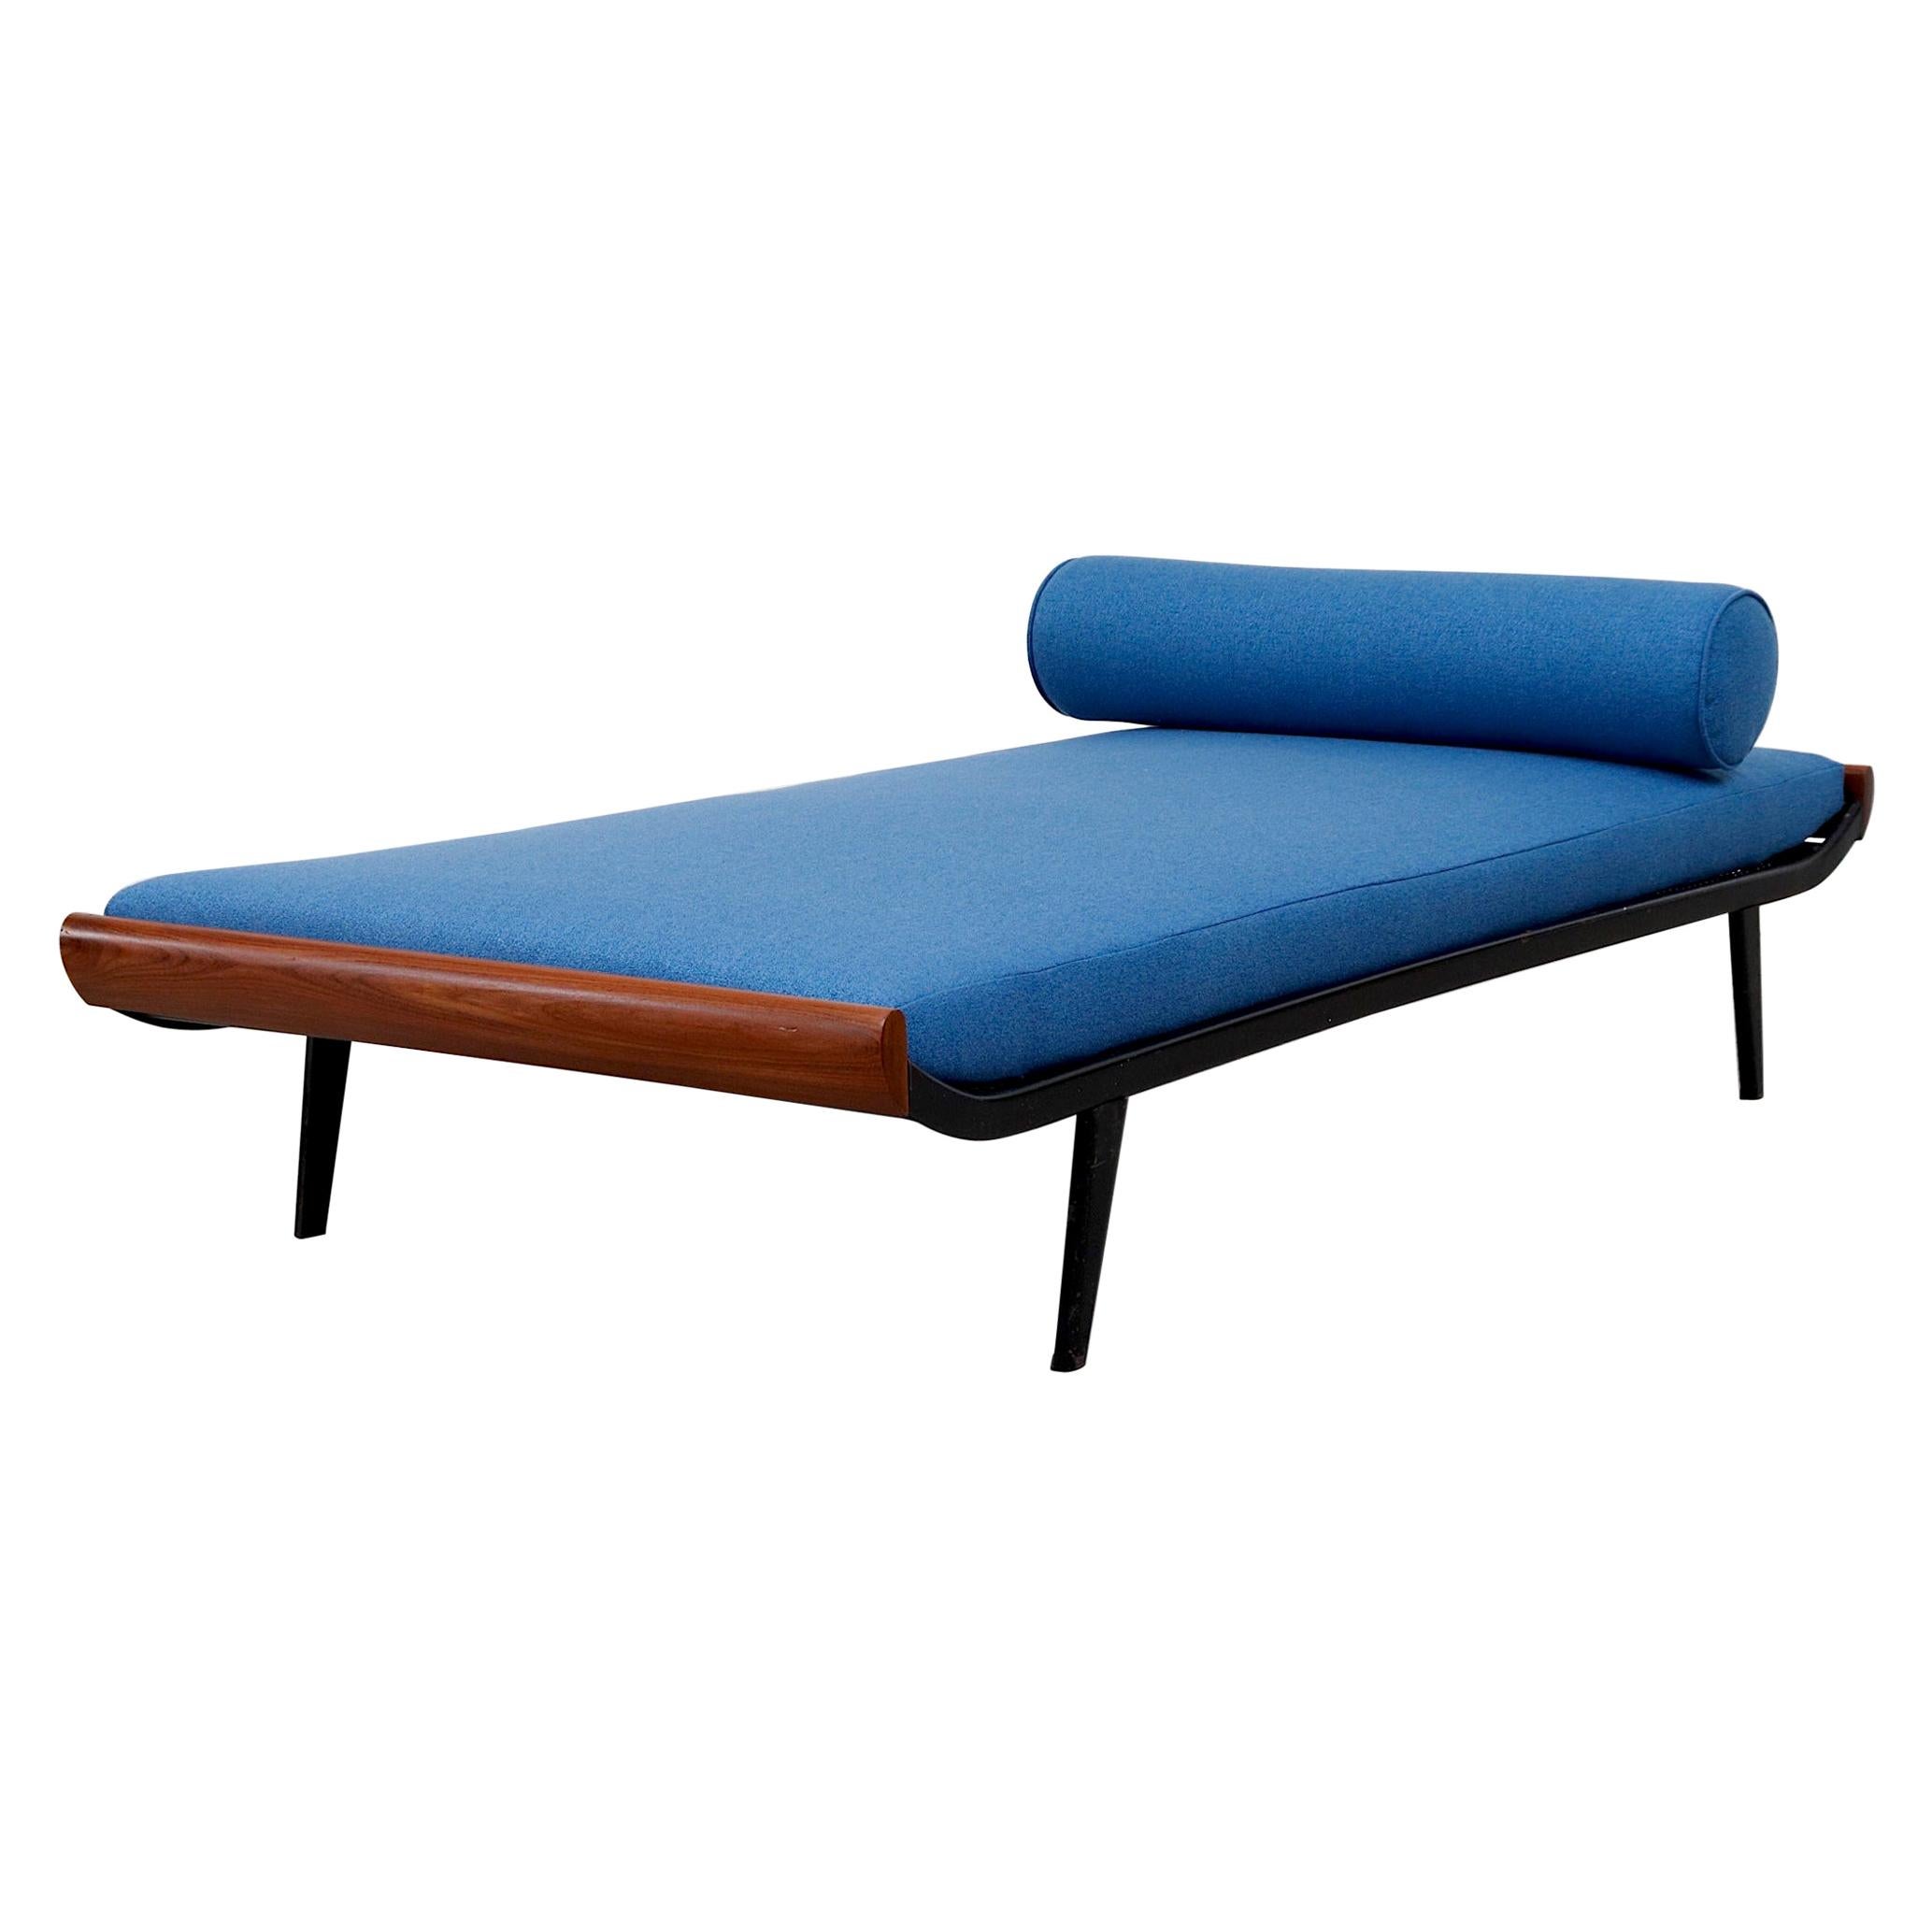 Midcentury 'Cleopatra' Daybed by A.R. Cordemeyer for Auping